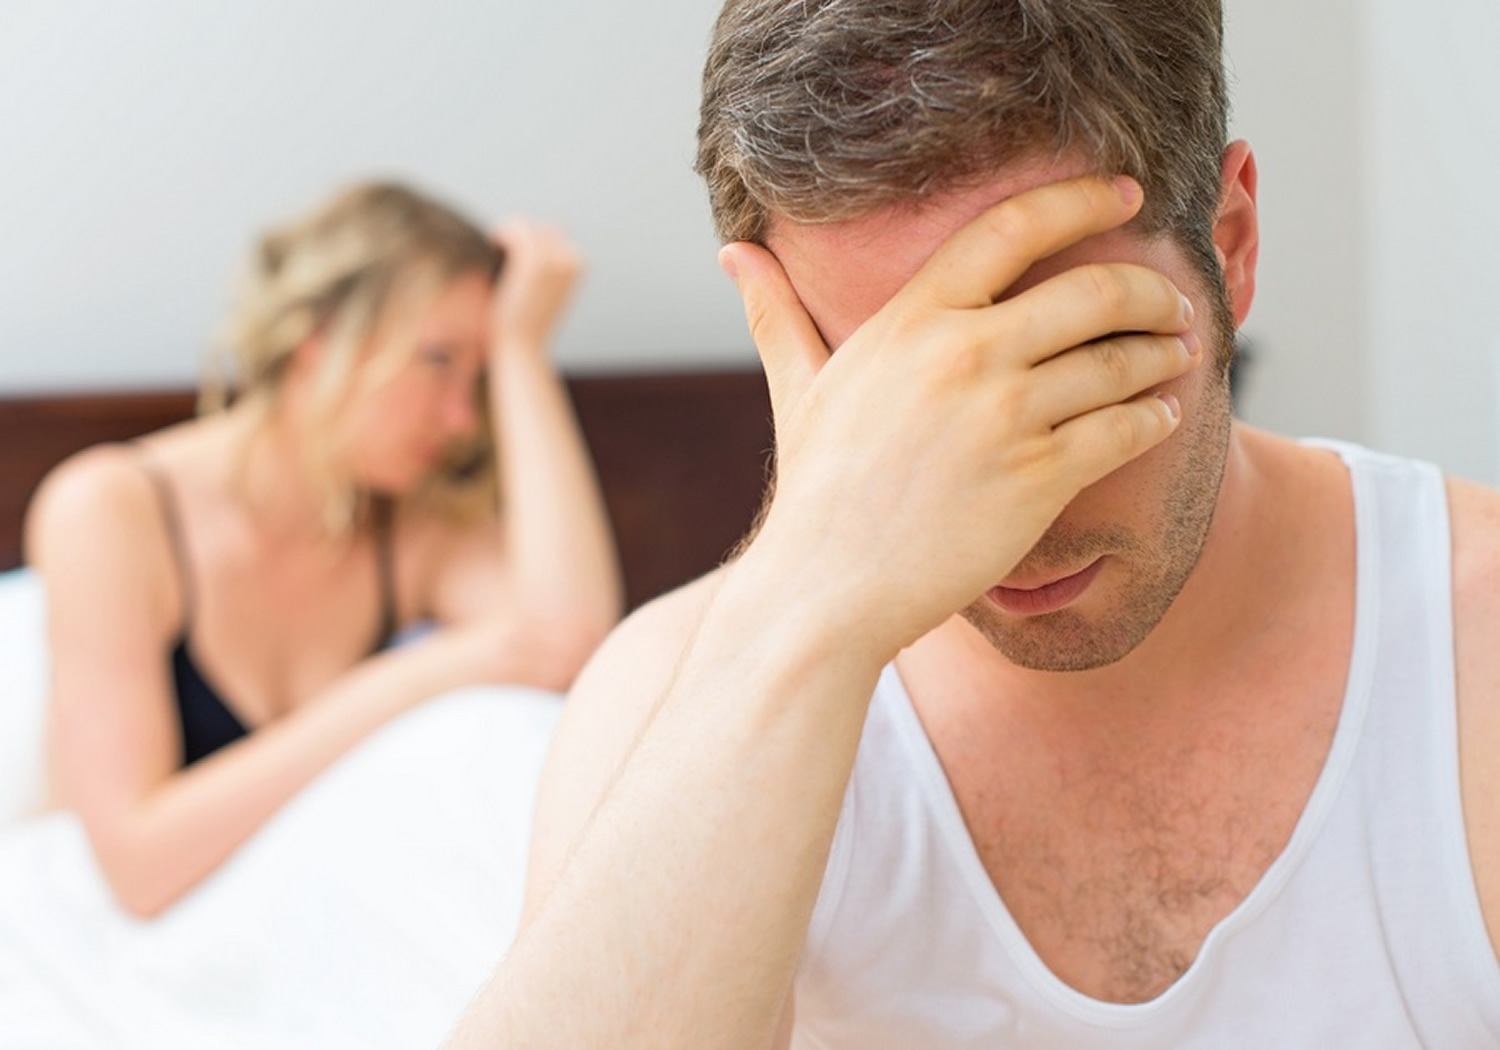 Impotence affects several young men in their 20s. Here are some treatment tips on how to remedy this issue.